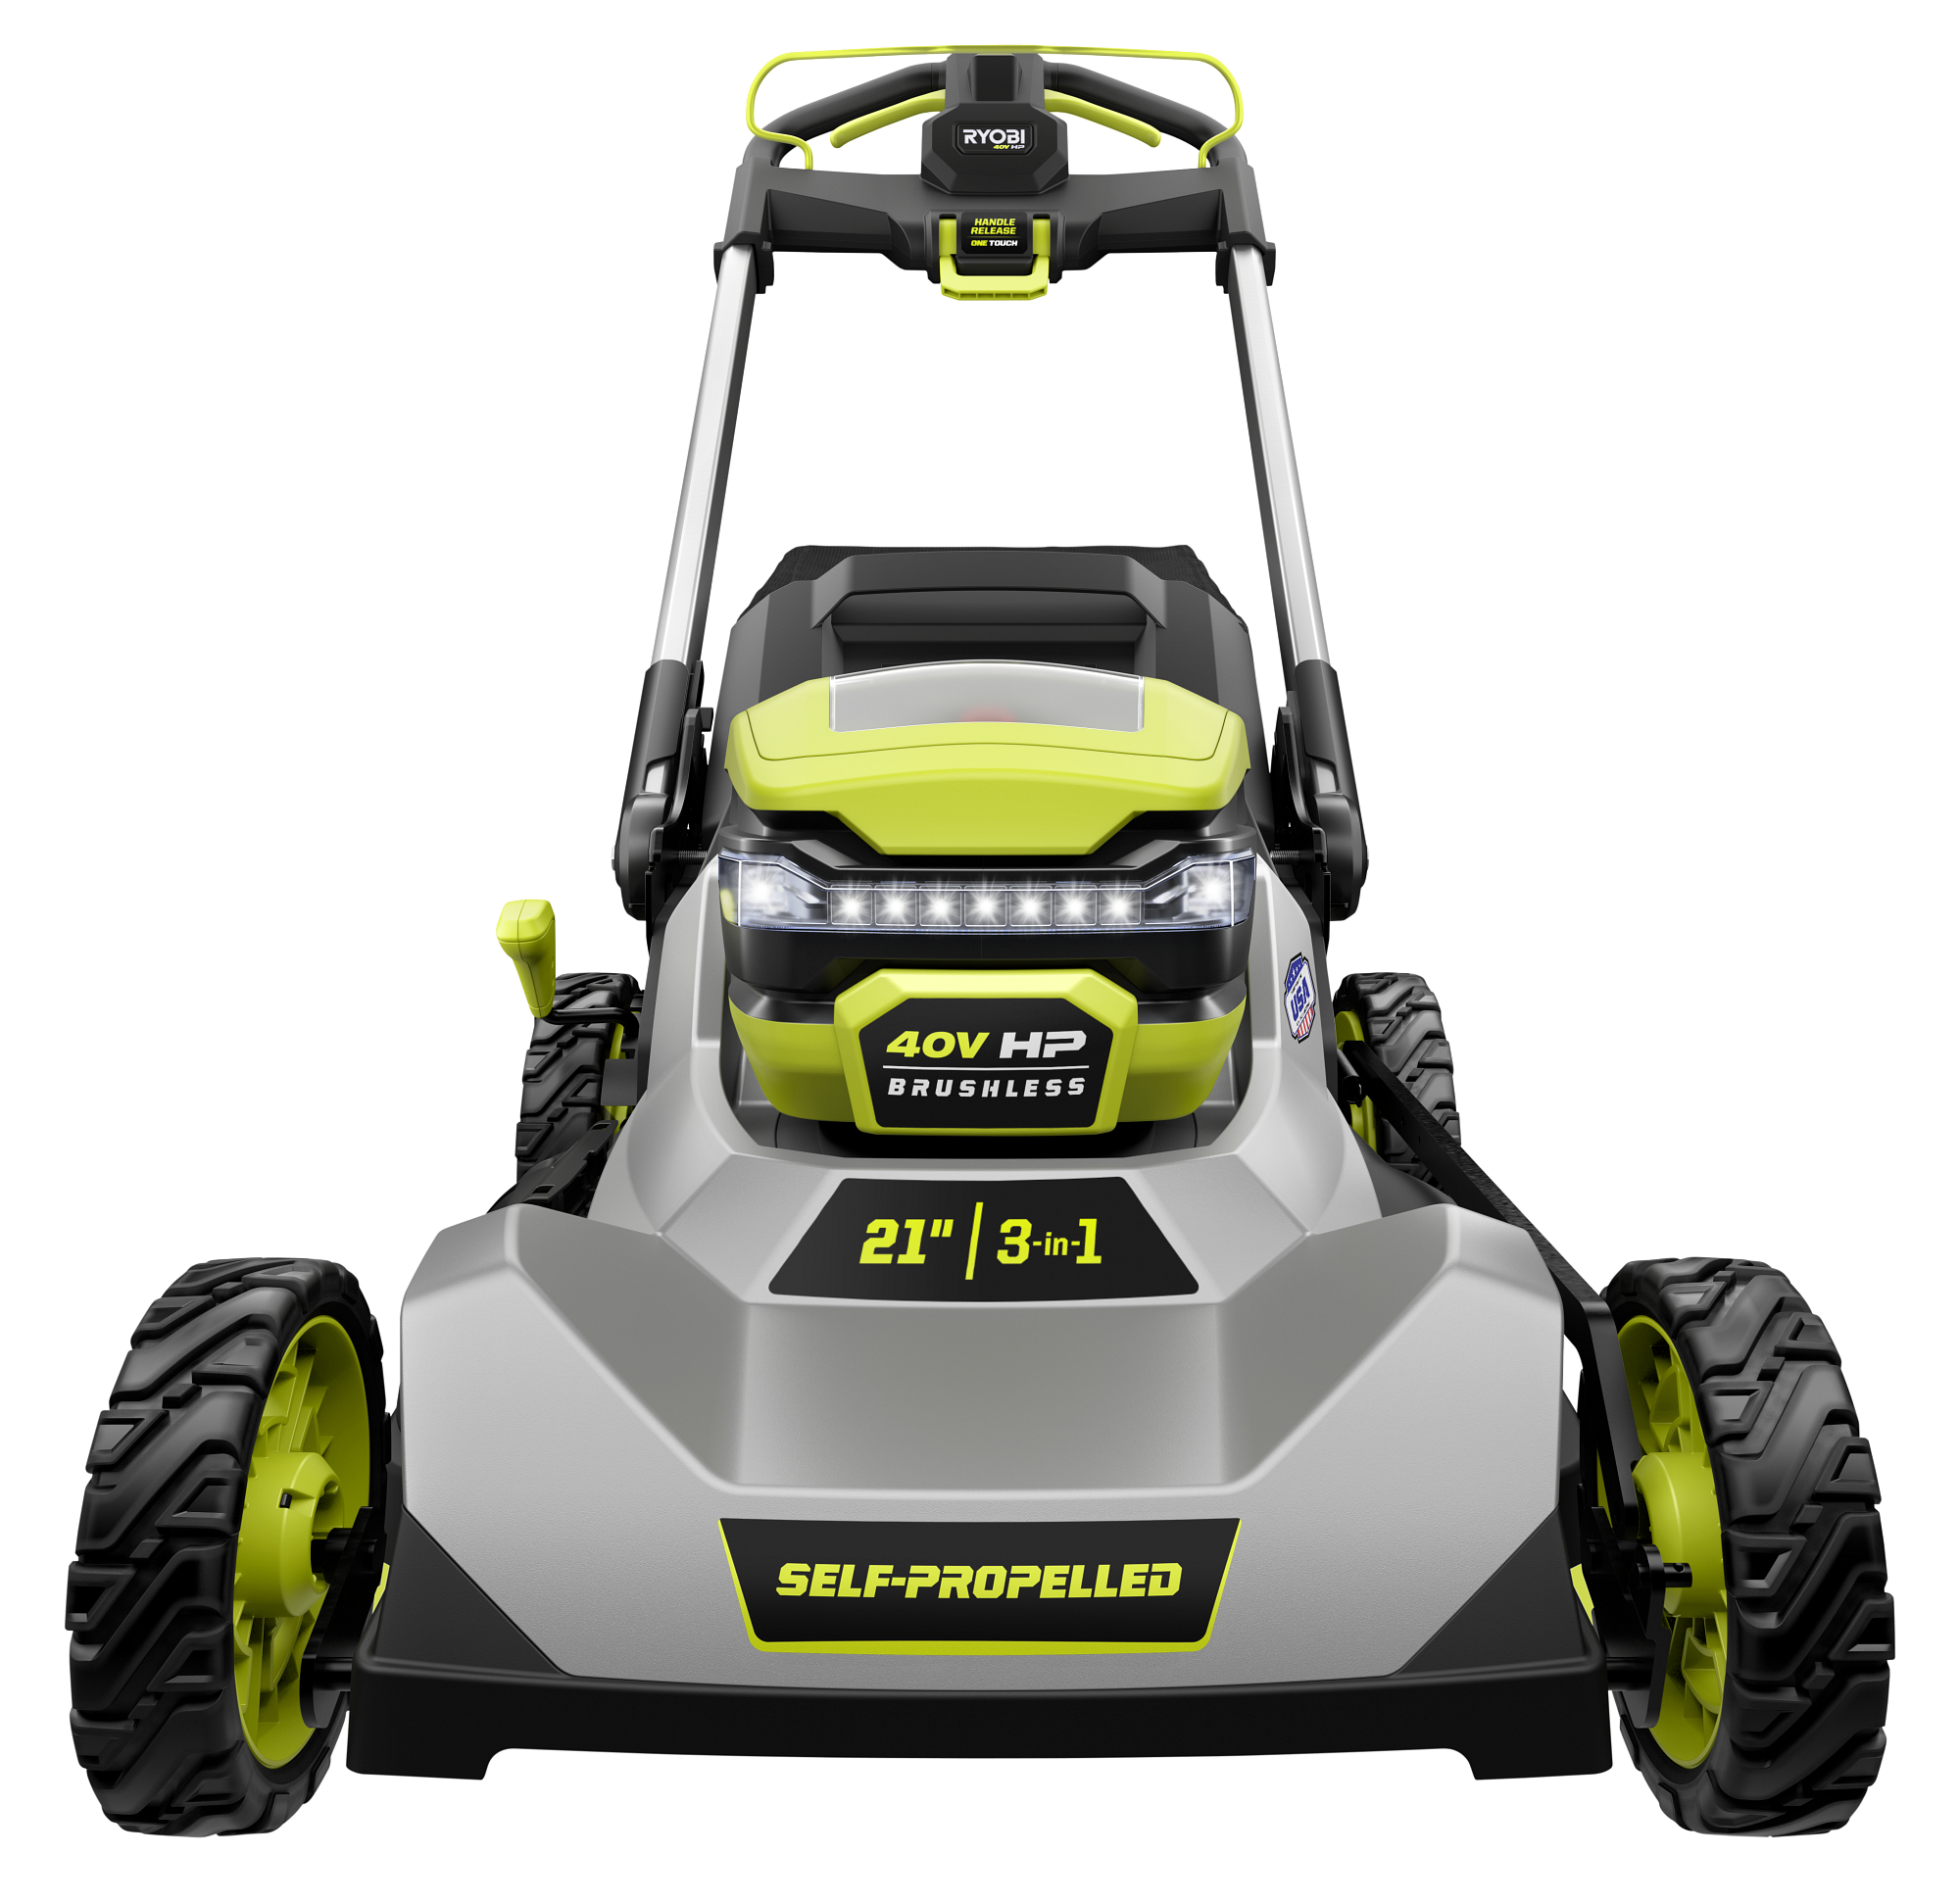 Product Features Image for 40V HP BRUSHLESS 21" WALK BEHIND LAWN MOWER KIT.